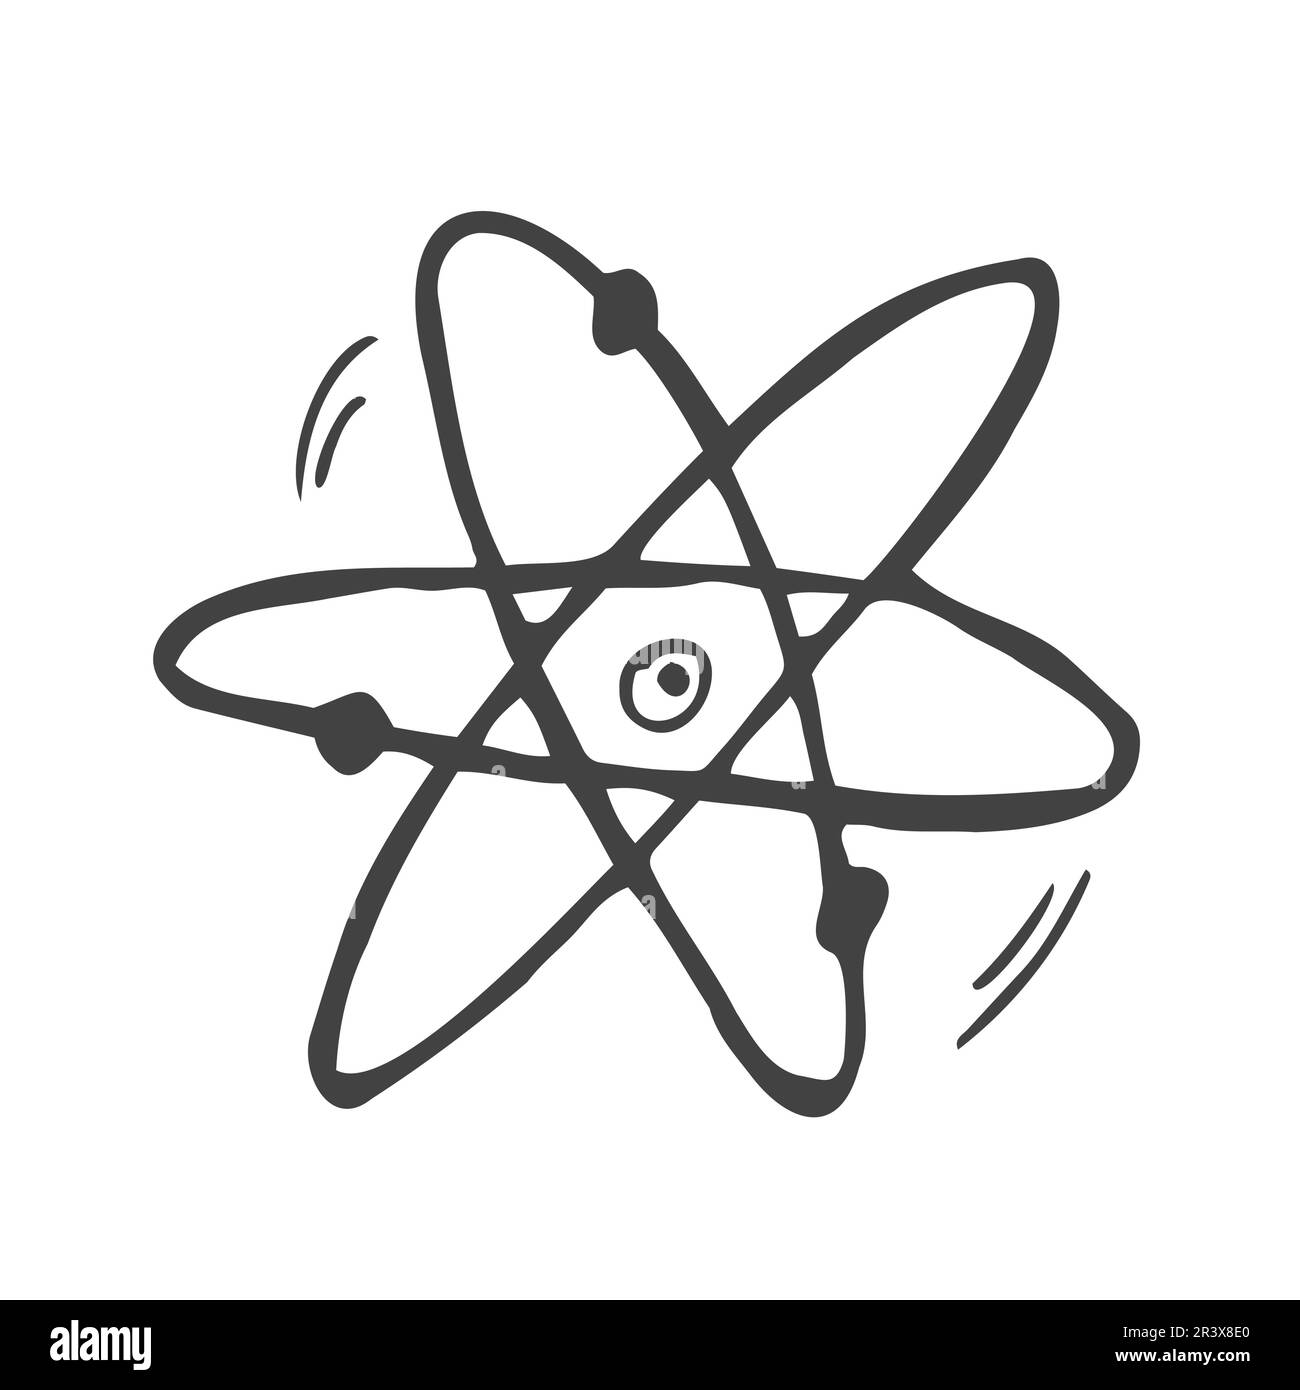 scientific atom symbol, simple icon. Hand drawn picture on paper sheet. Blue ink, outline sketch style. Doodle on checkered background Stock Vector